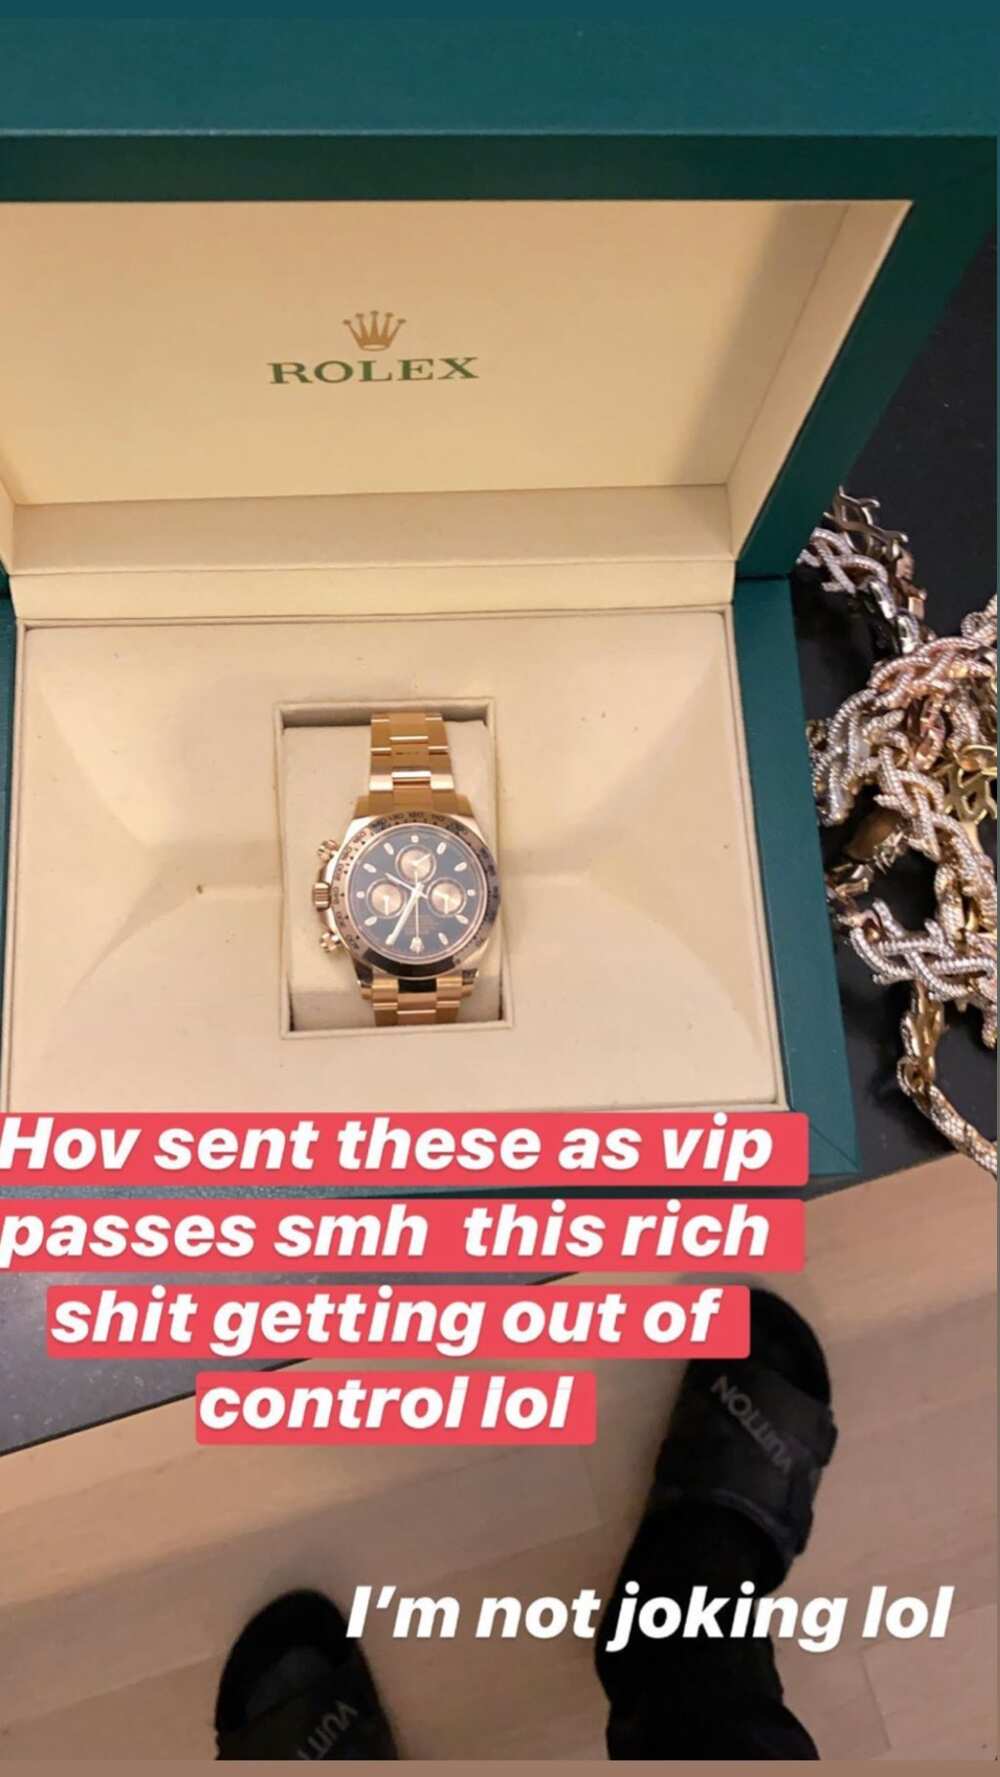 JAY-Z sends Meek Mill and Swizz Beatz Rolex watches as VIP pass to his event